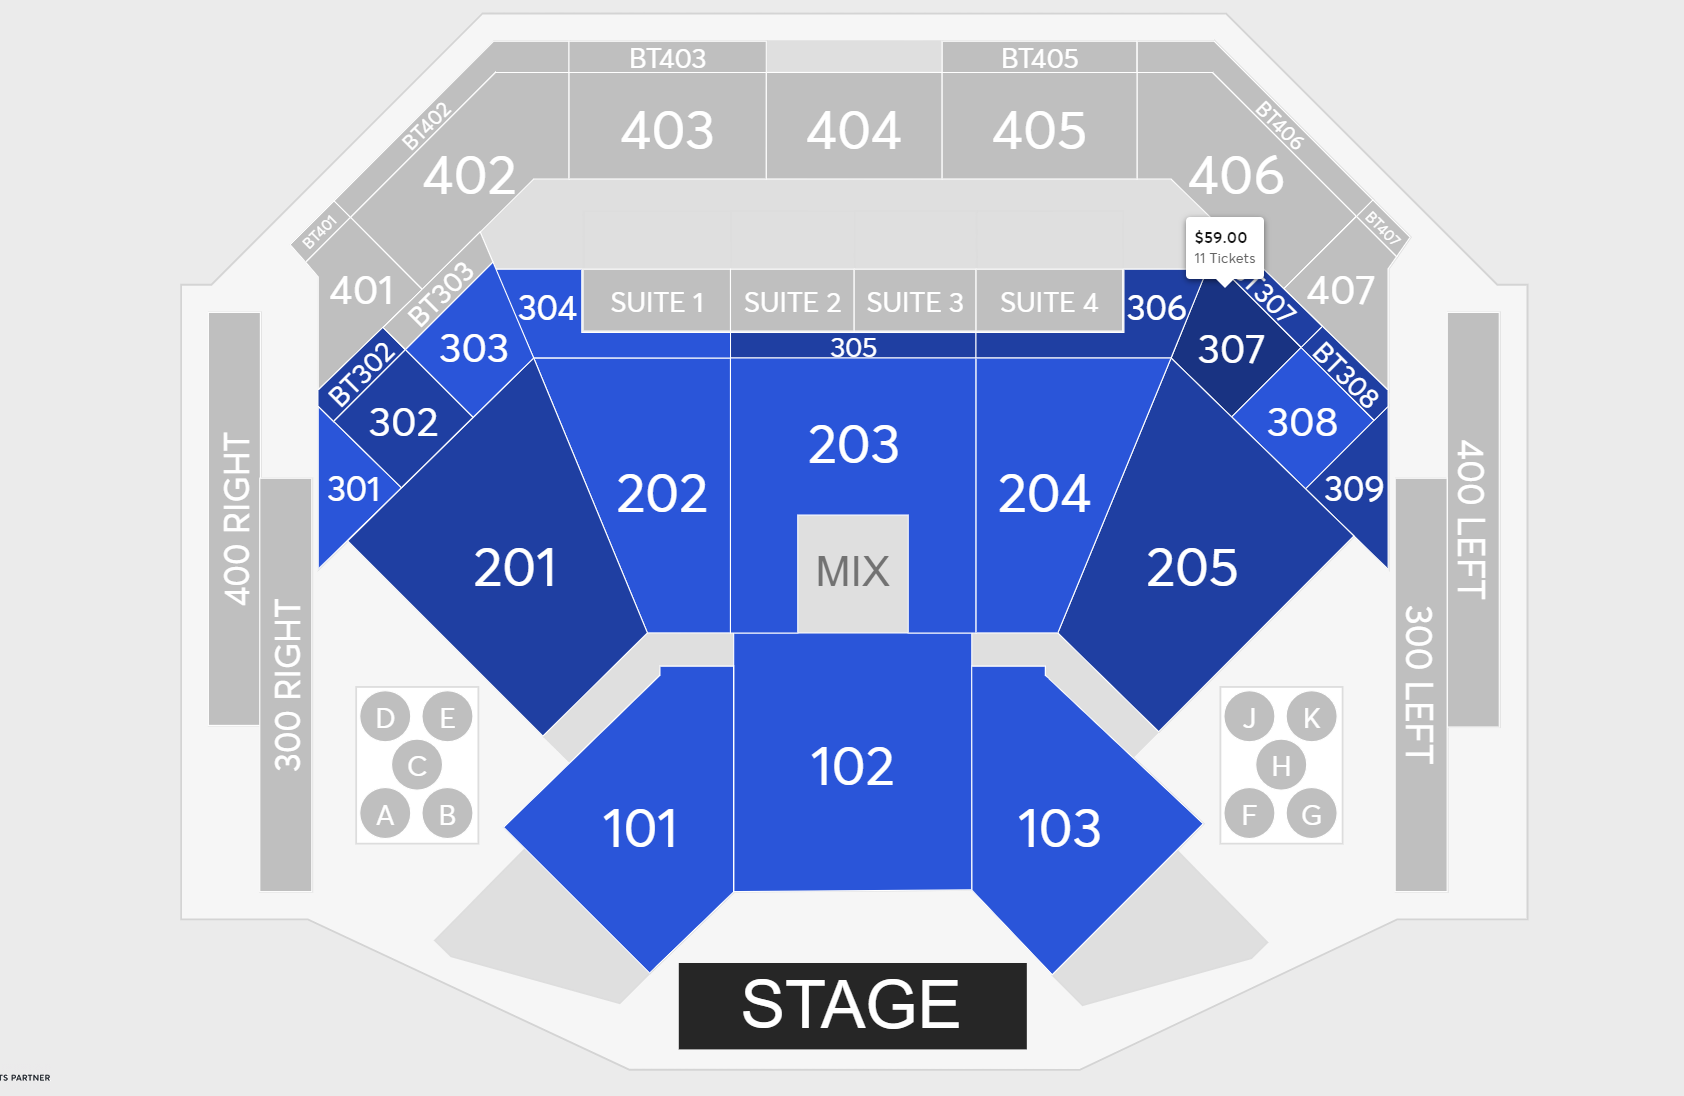 Seats in the 300s are priced at $59, while tickets in the 200s are $89, and seats in the 100s are $99